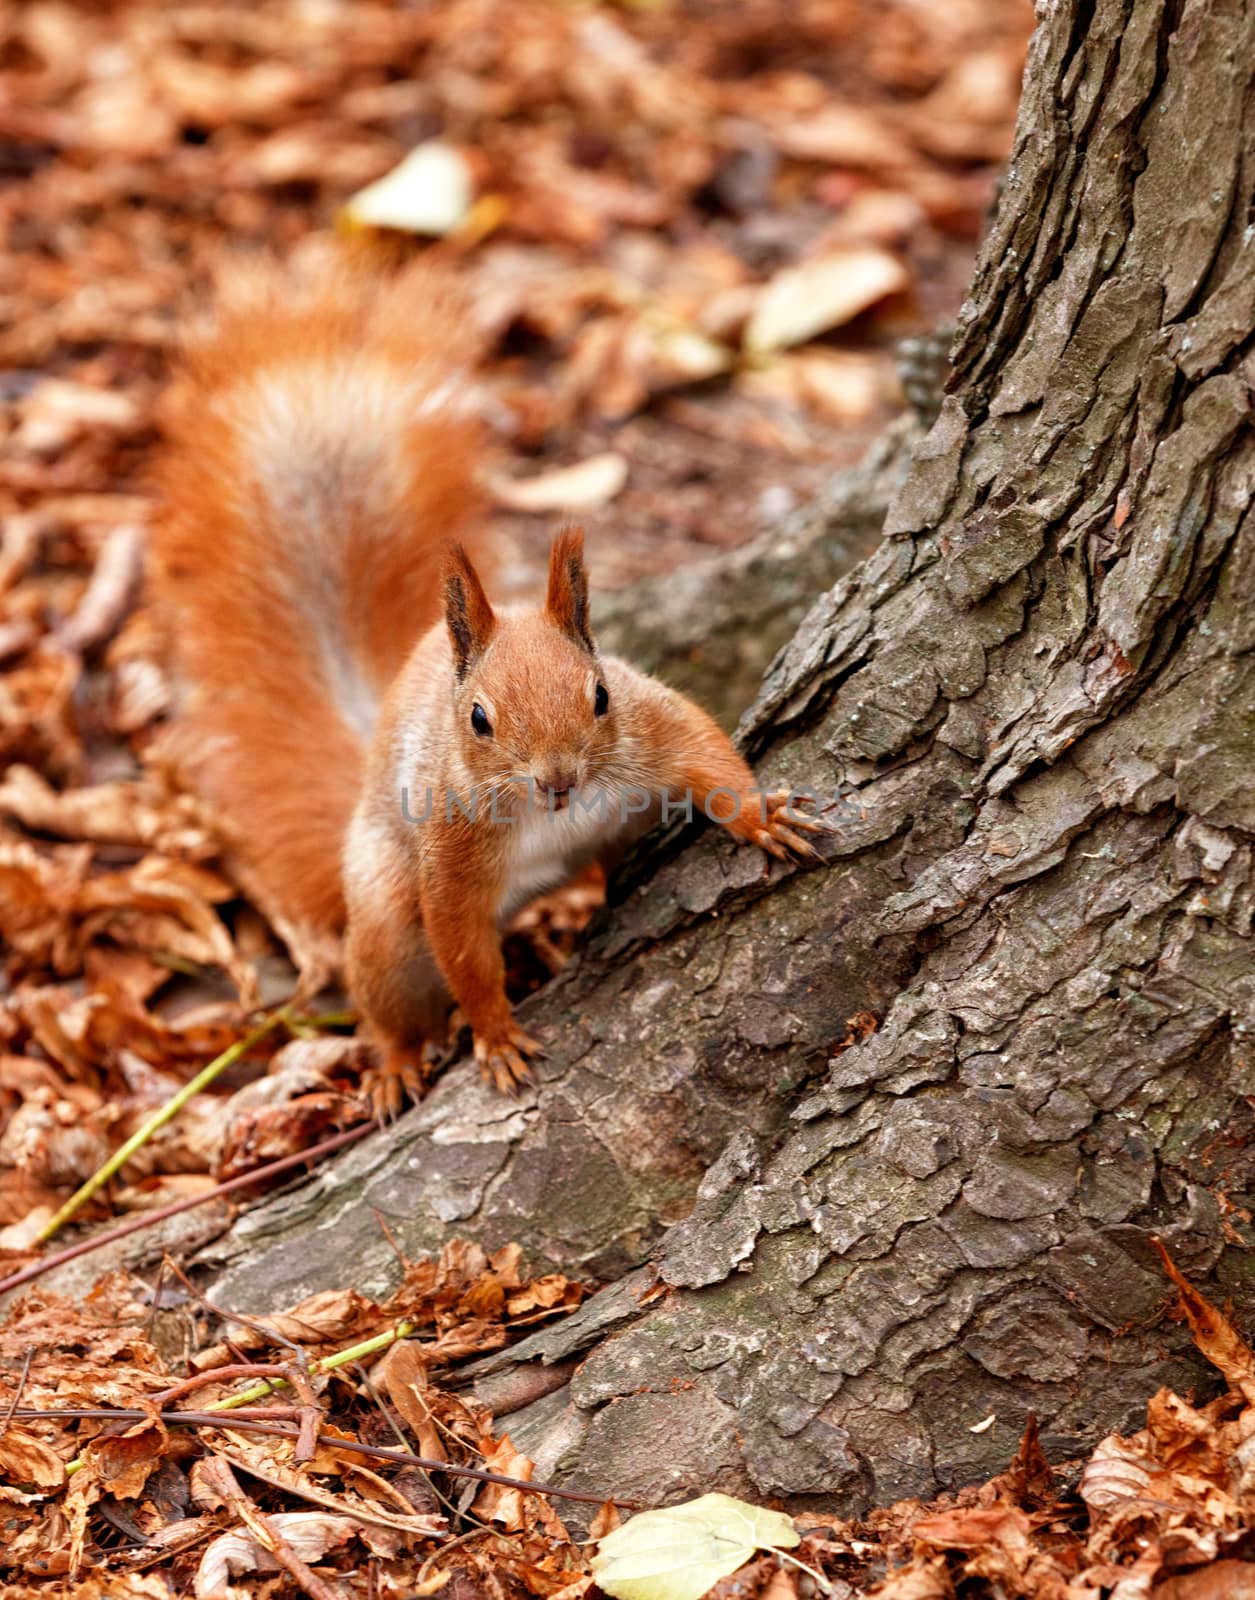 Red fluffy squirrel merging with the background of autumn fallen leaves in the forest, looks at us curiously from behind a tree.